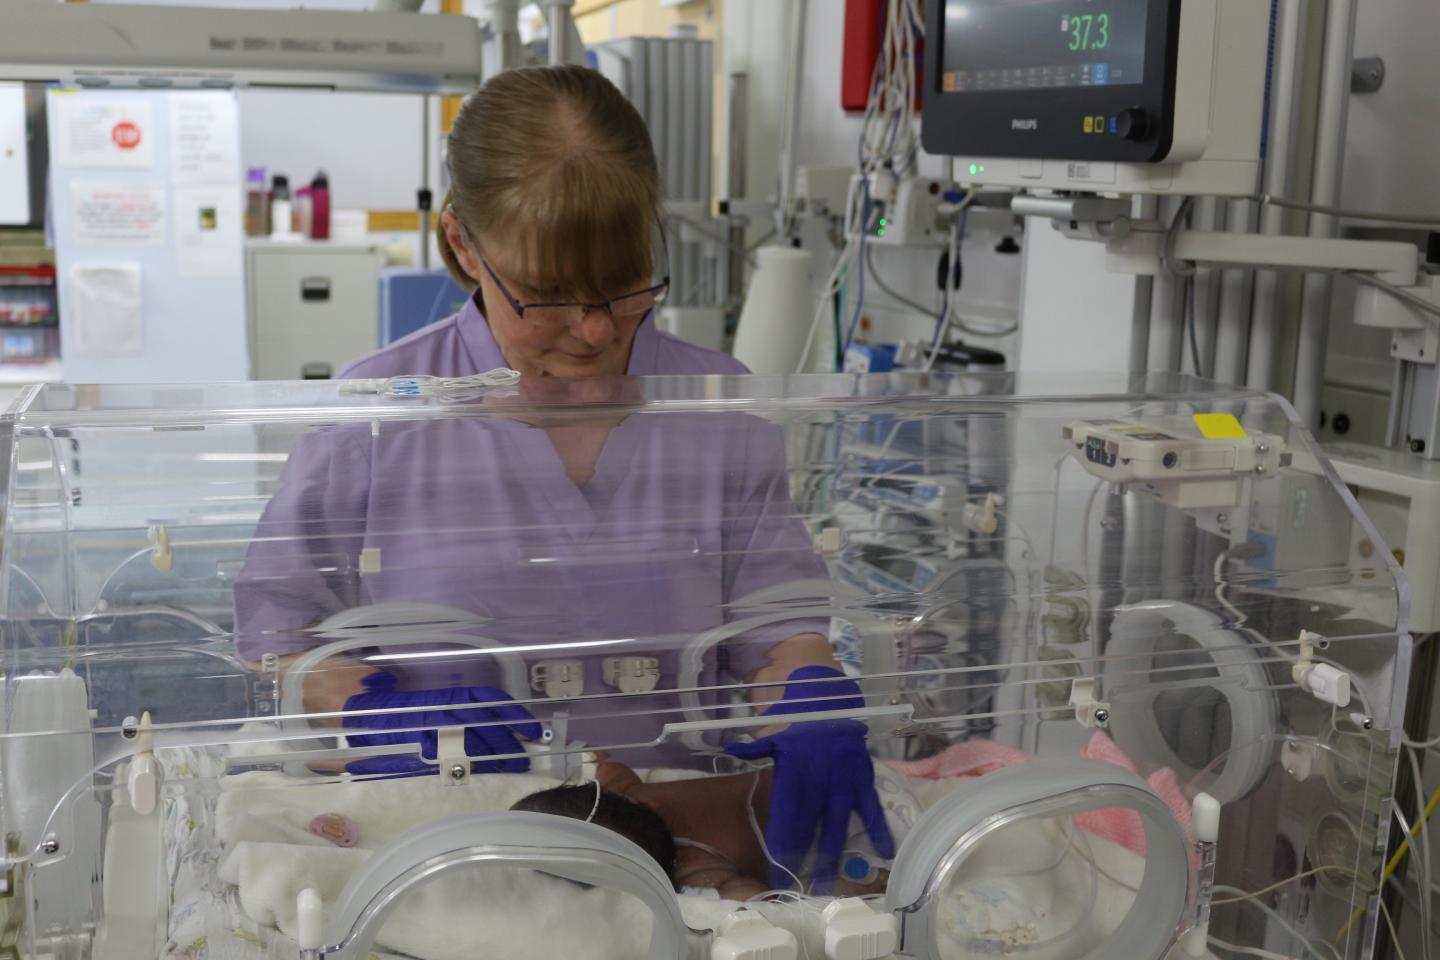 A Baby in Neonatal Care in Bradford